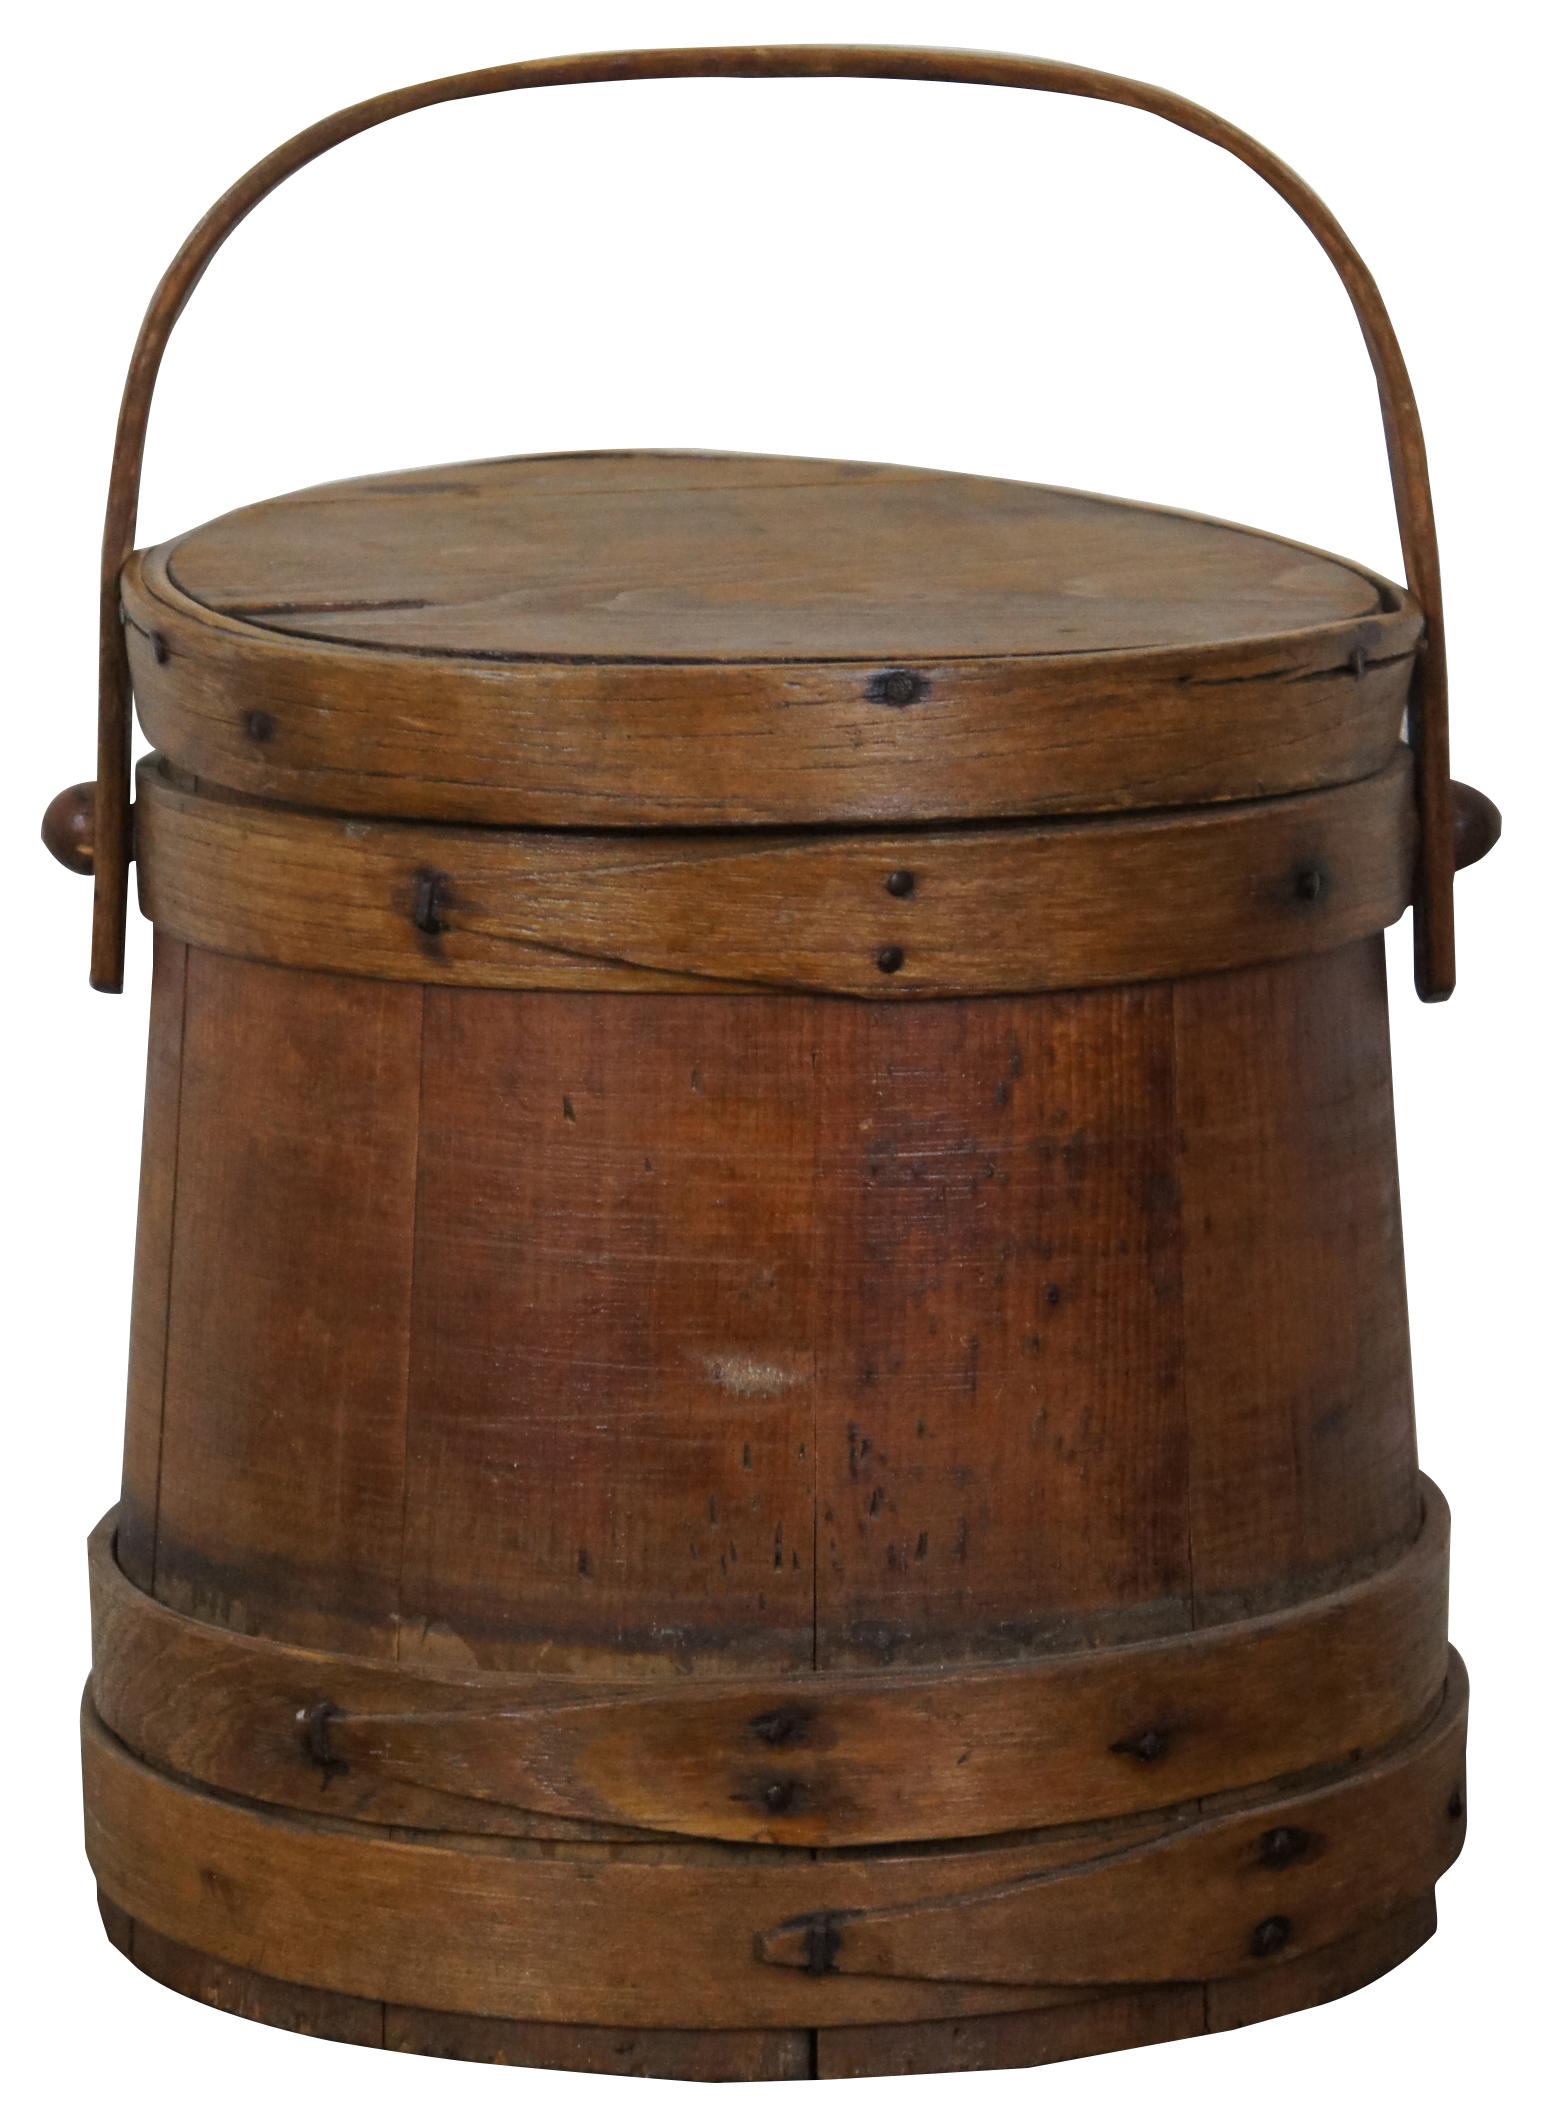 Antique wooden sugar bucket or firkin with rotating handle and lid. Measure: 10”.
  